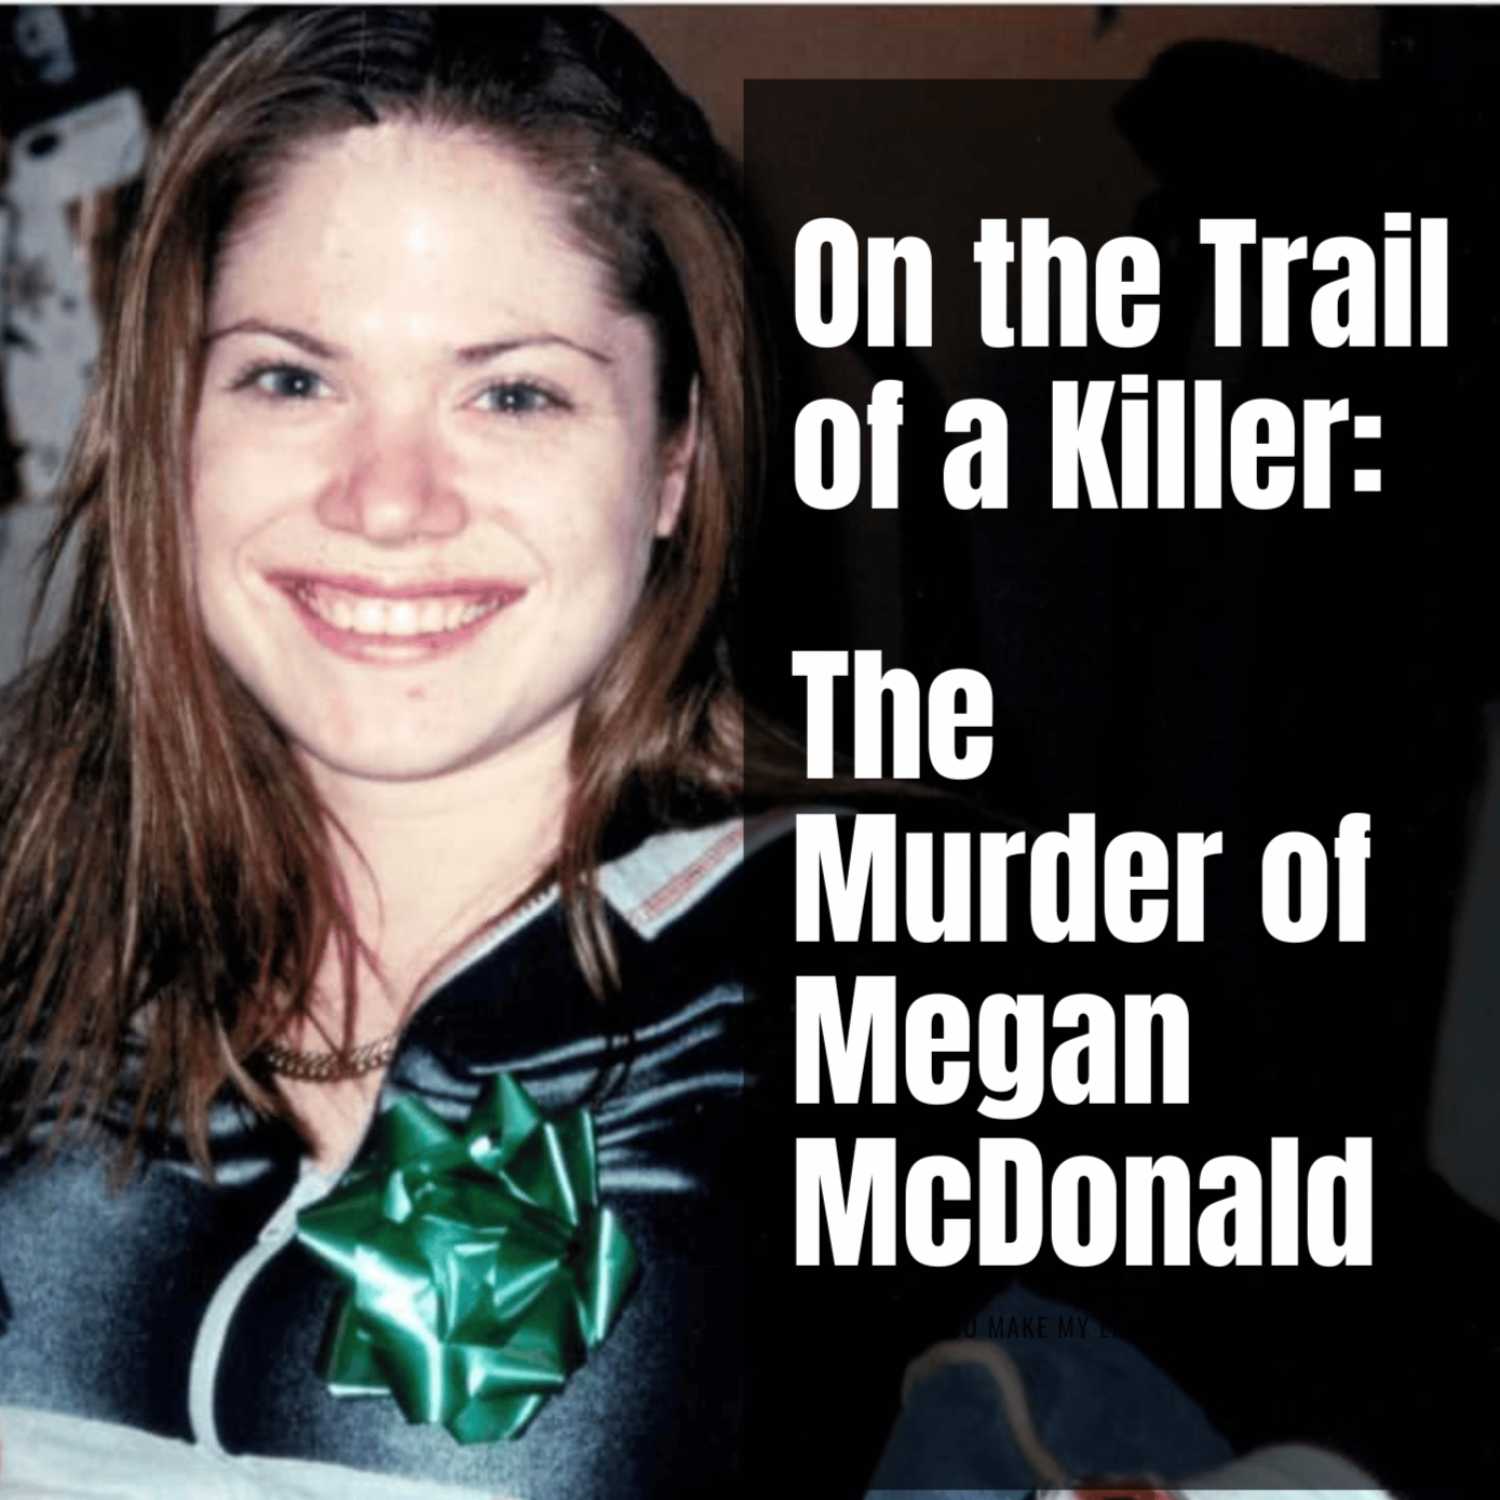 On the Trail of a Killer: The Murder of Megan McDonald